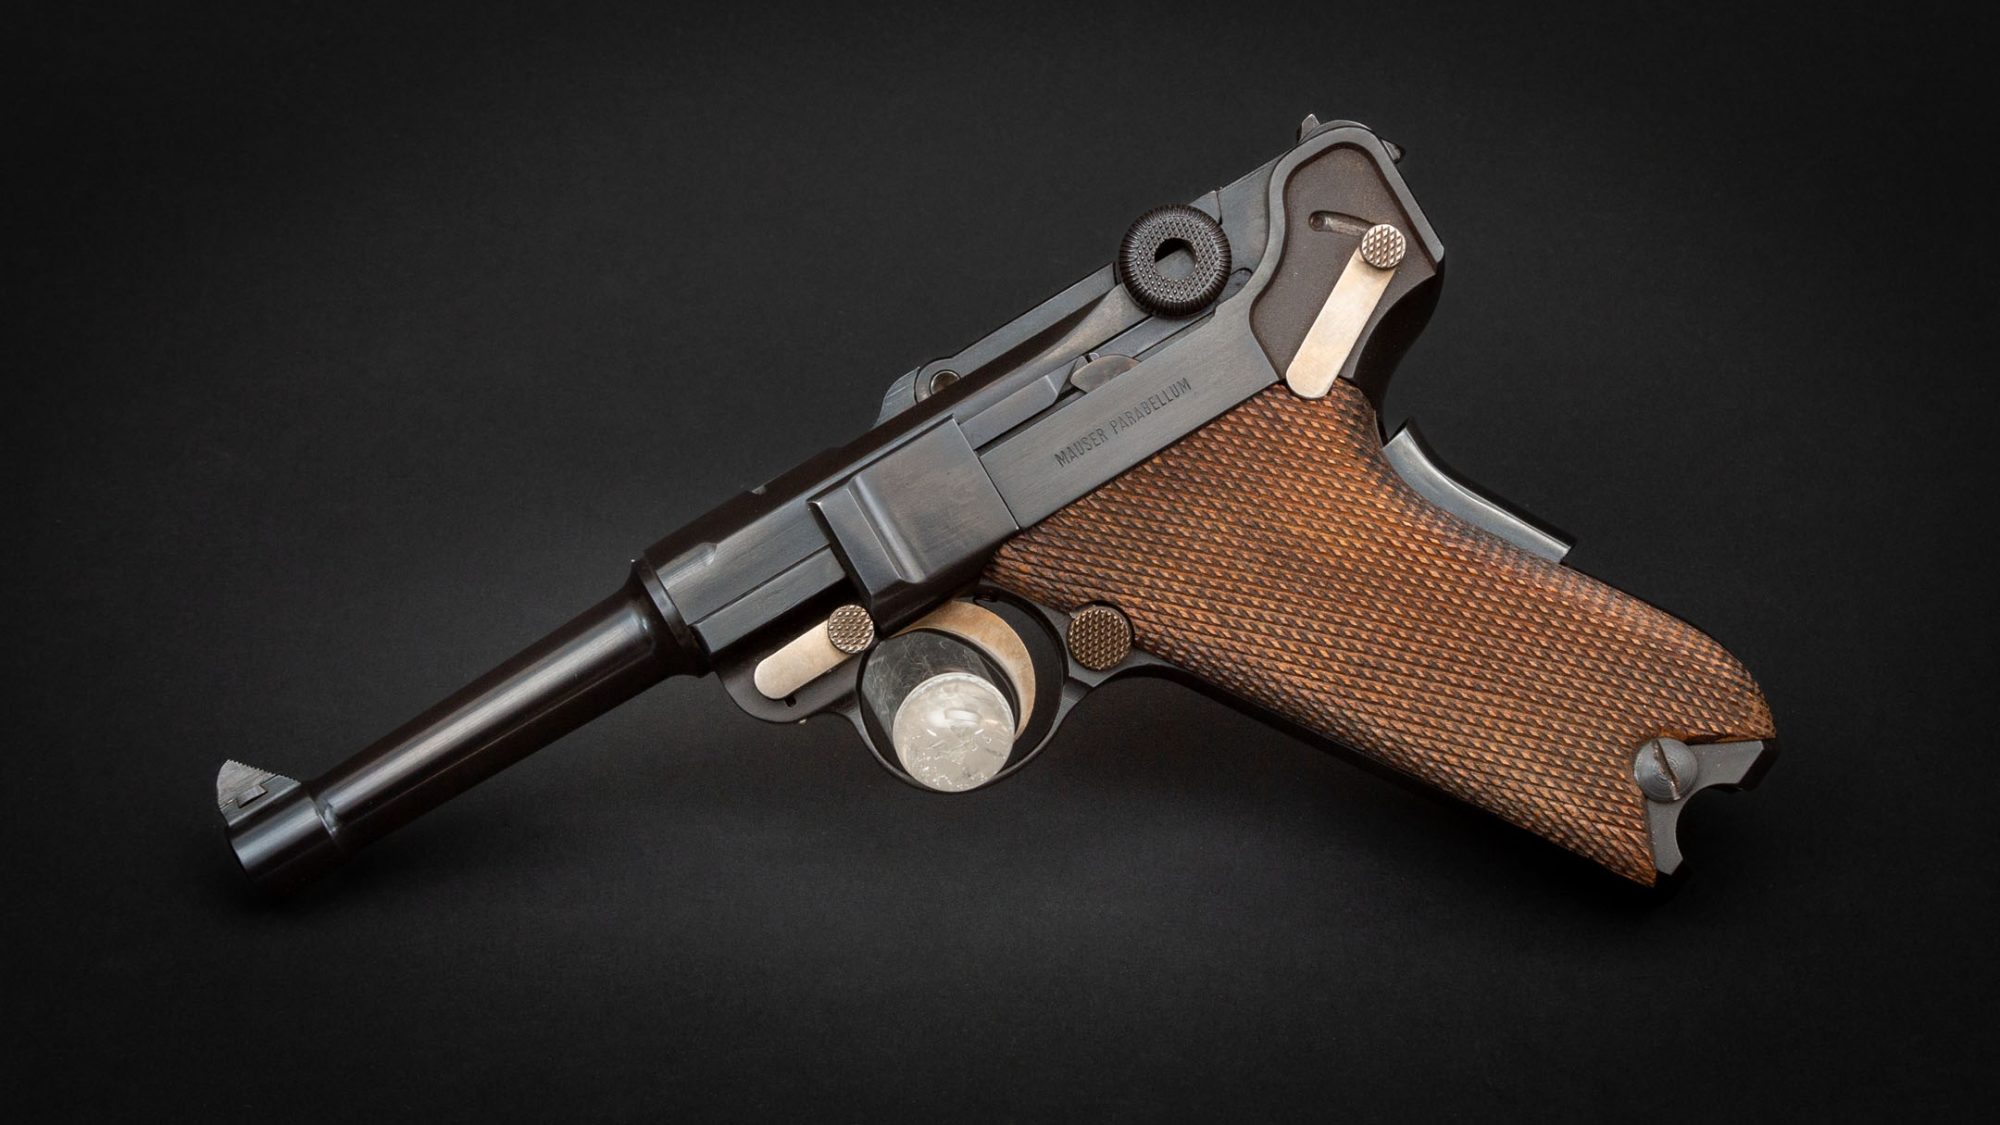 Interarms Mauser Parabellum in 9mm, for sale by Turnbull Restoration Co. of Bloomfield, NY